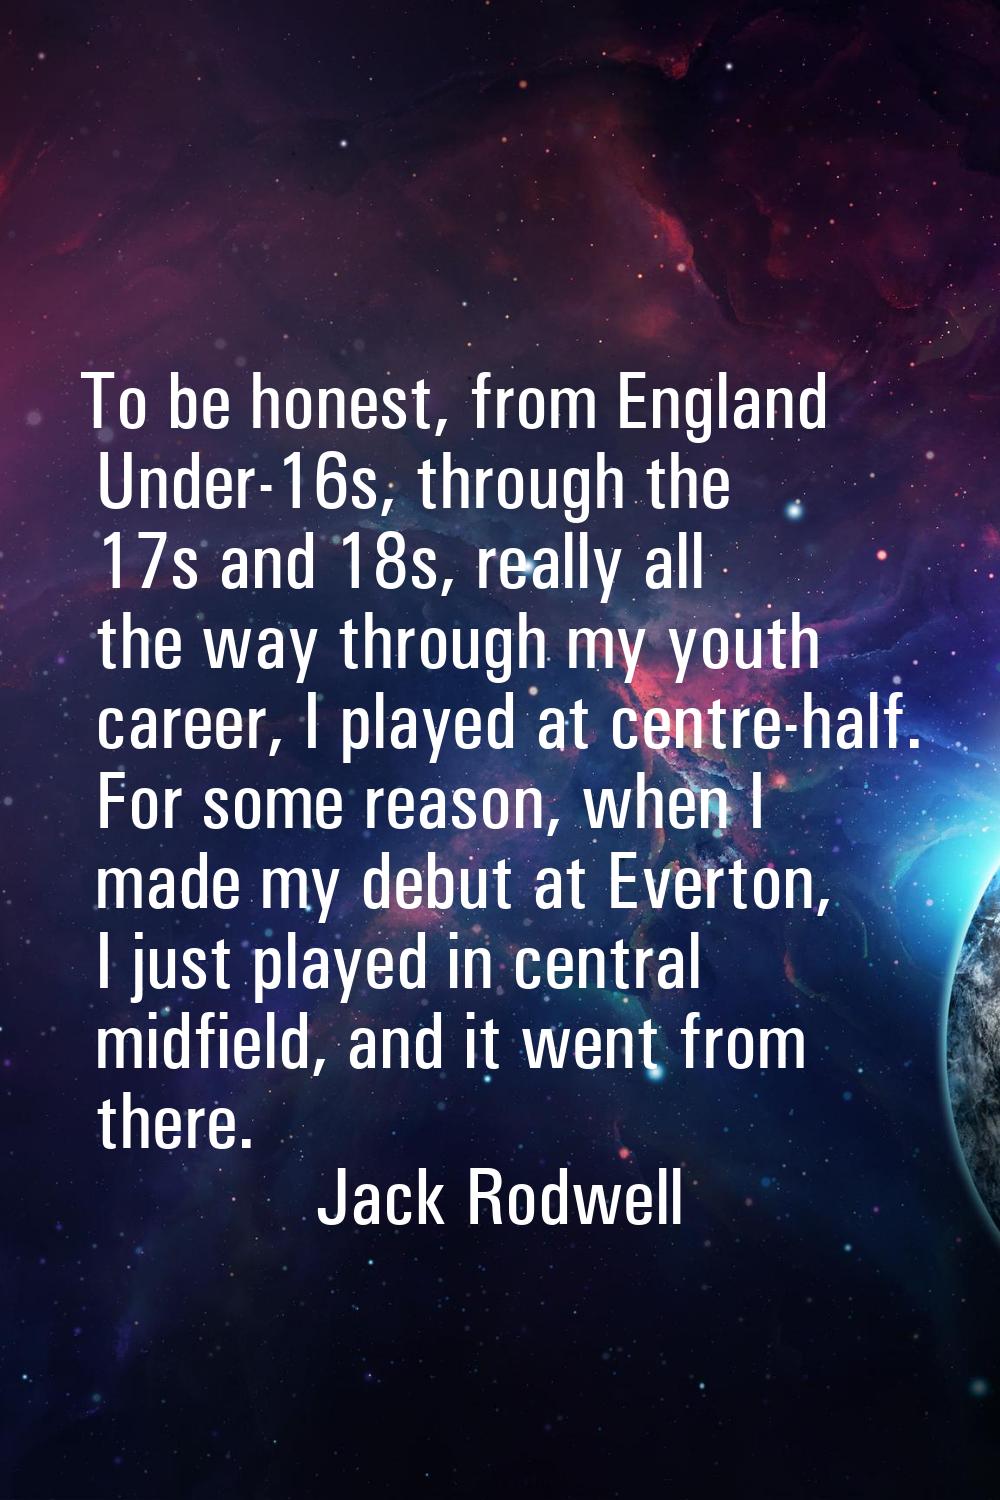 To be honest, from England Under-16s, through the 17s and 18s, really all the way through my youth 